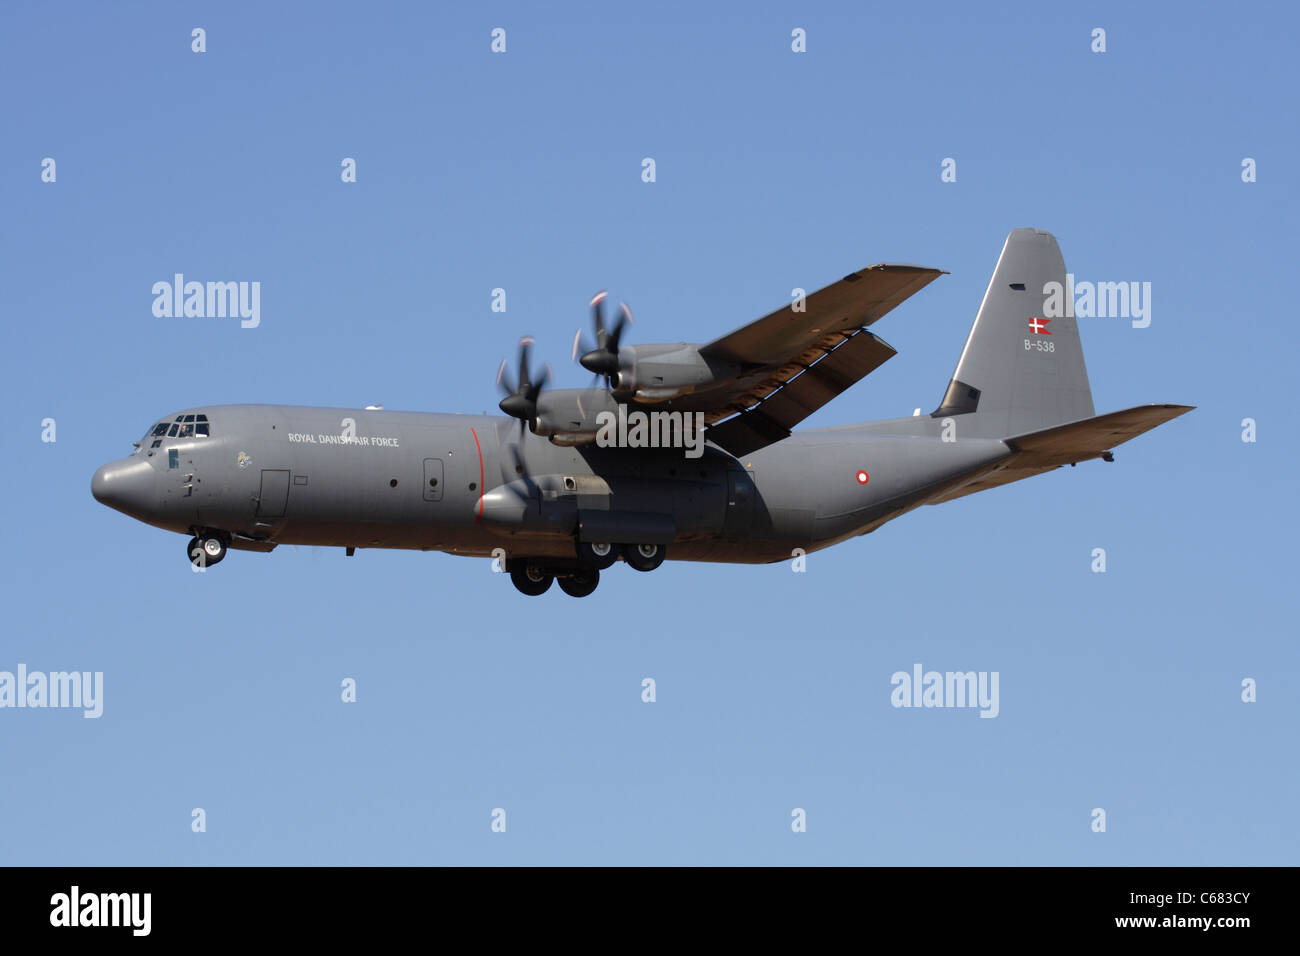 Military aviation. Lockheed Martin C-130J-30 Hercules cargo plane of the Royal Danish Air Force on final approach Stock Photo